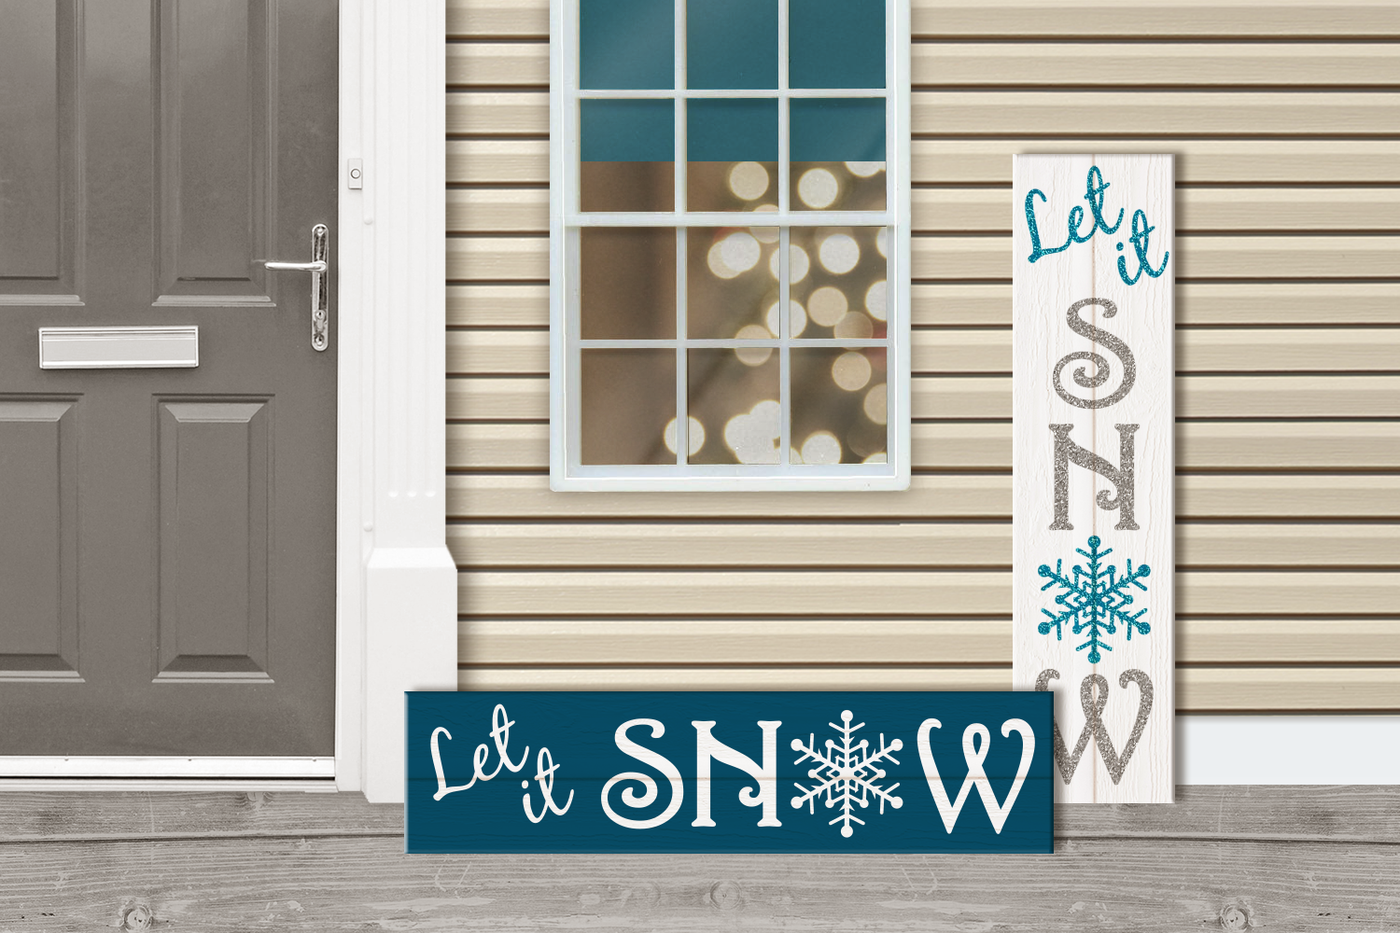 Vertical and horizontal signs at a front door. An out of focus Christmas tree is visible through the window. Each sign says "Let it SNOW" with a snowflake for the O.